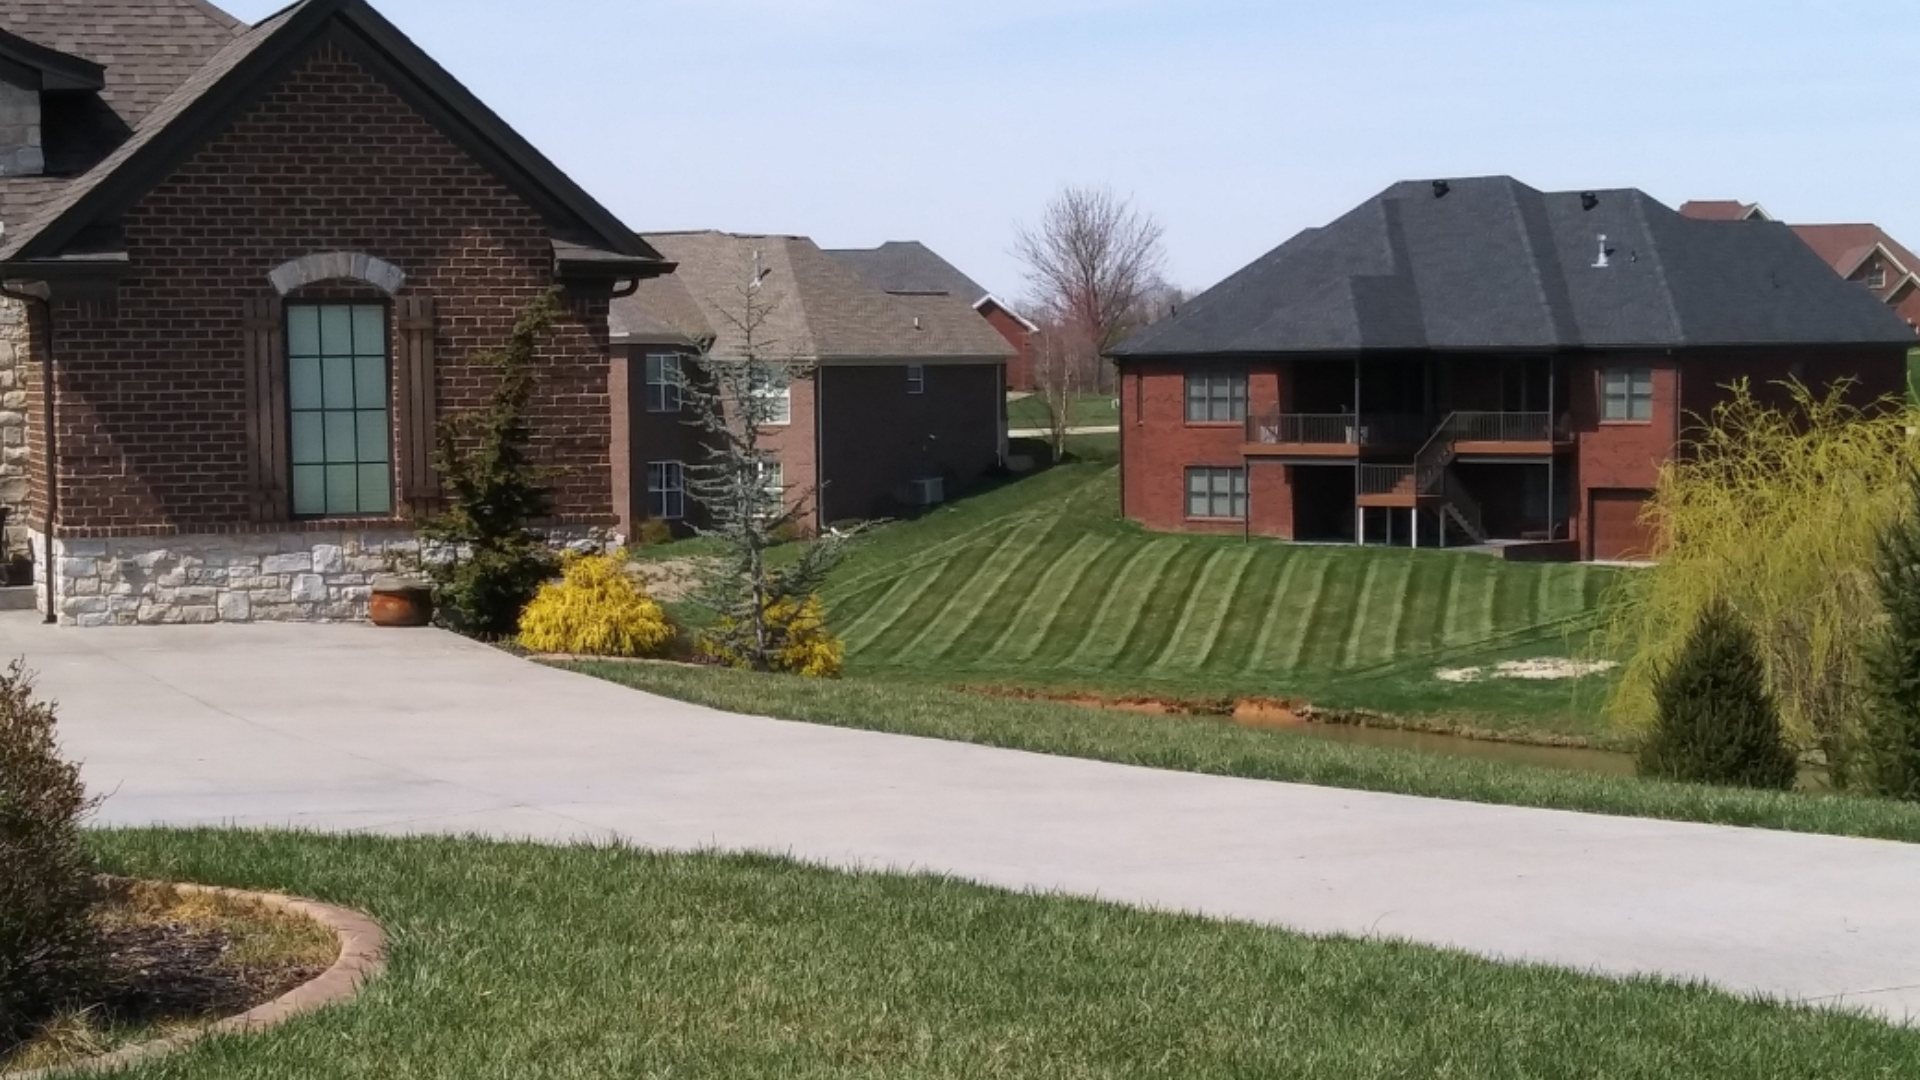 Backyard view of freshly mowed lawn with patterns in Hurstbourne, KY.